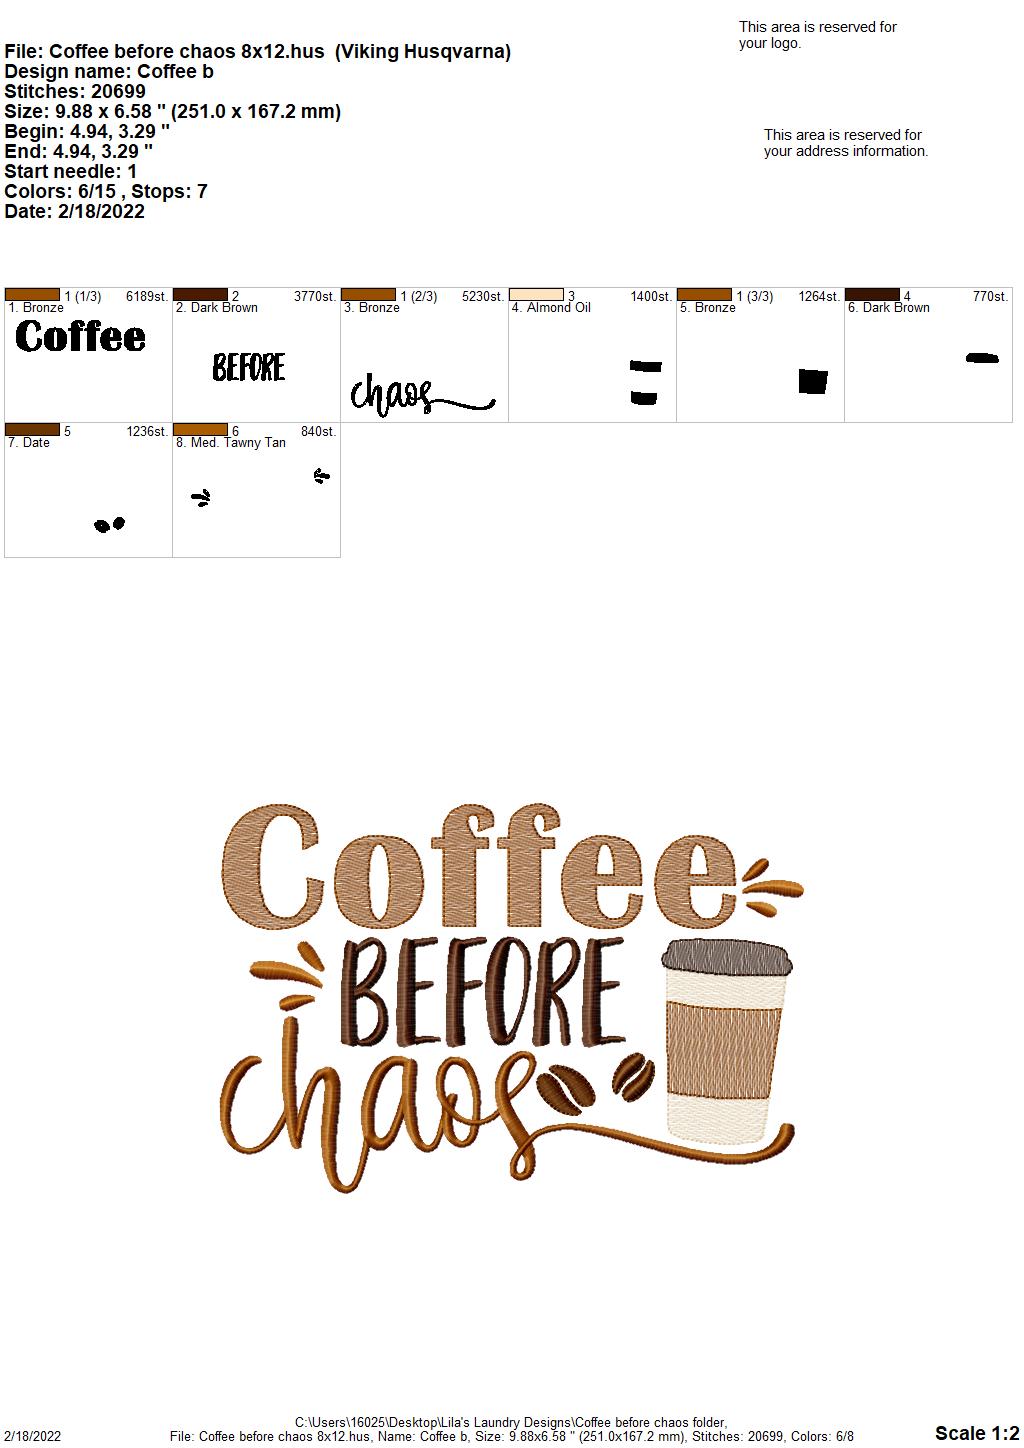 Coffee before chaos - 3 sizes- Digital Embroidery Design